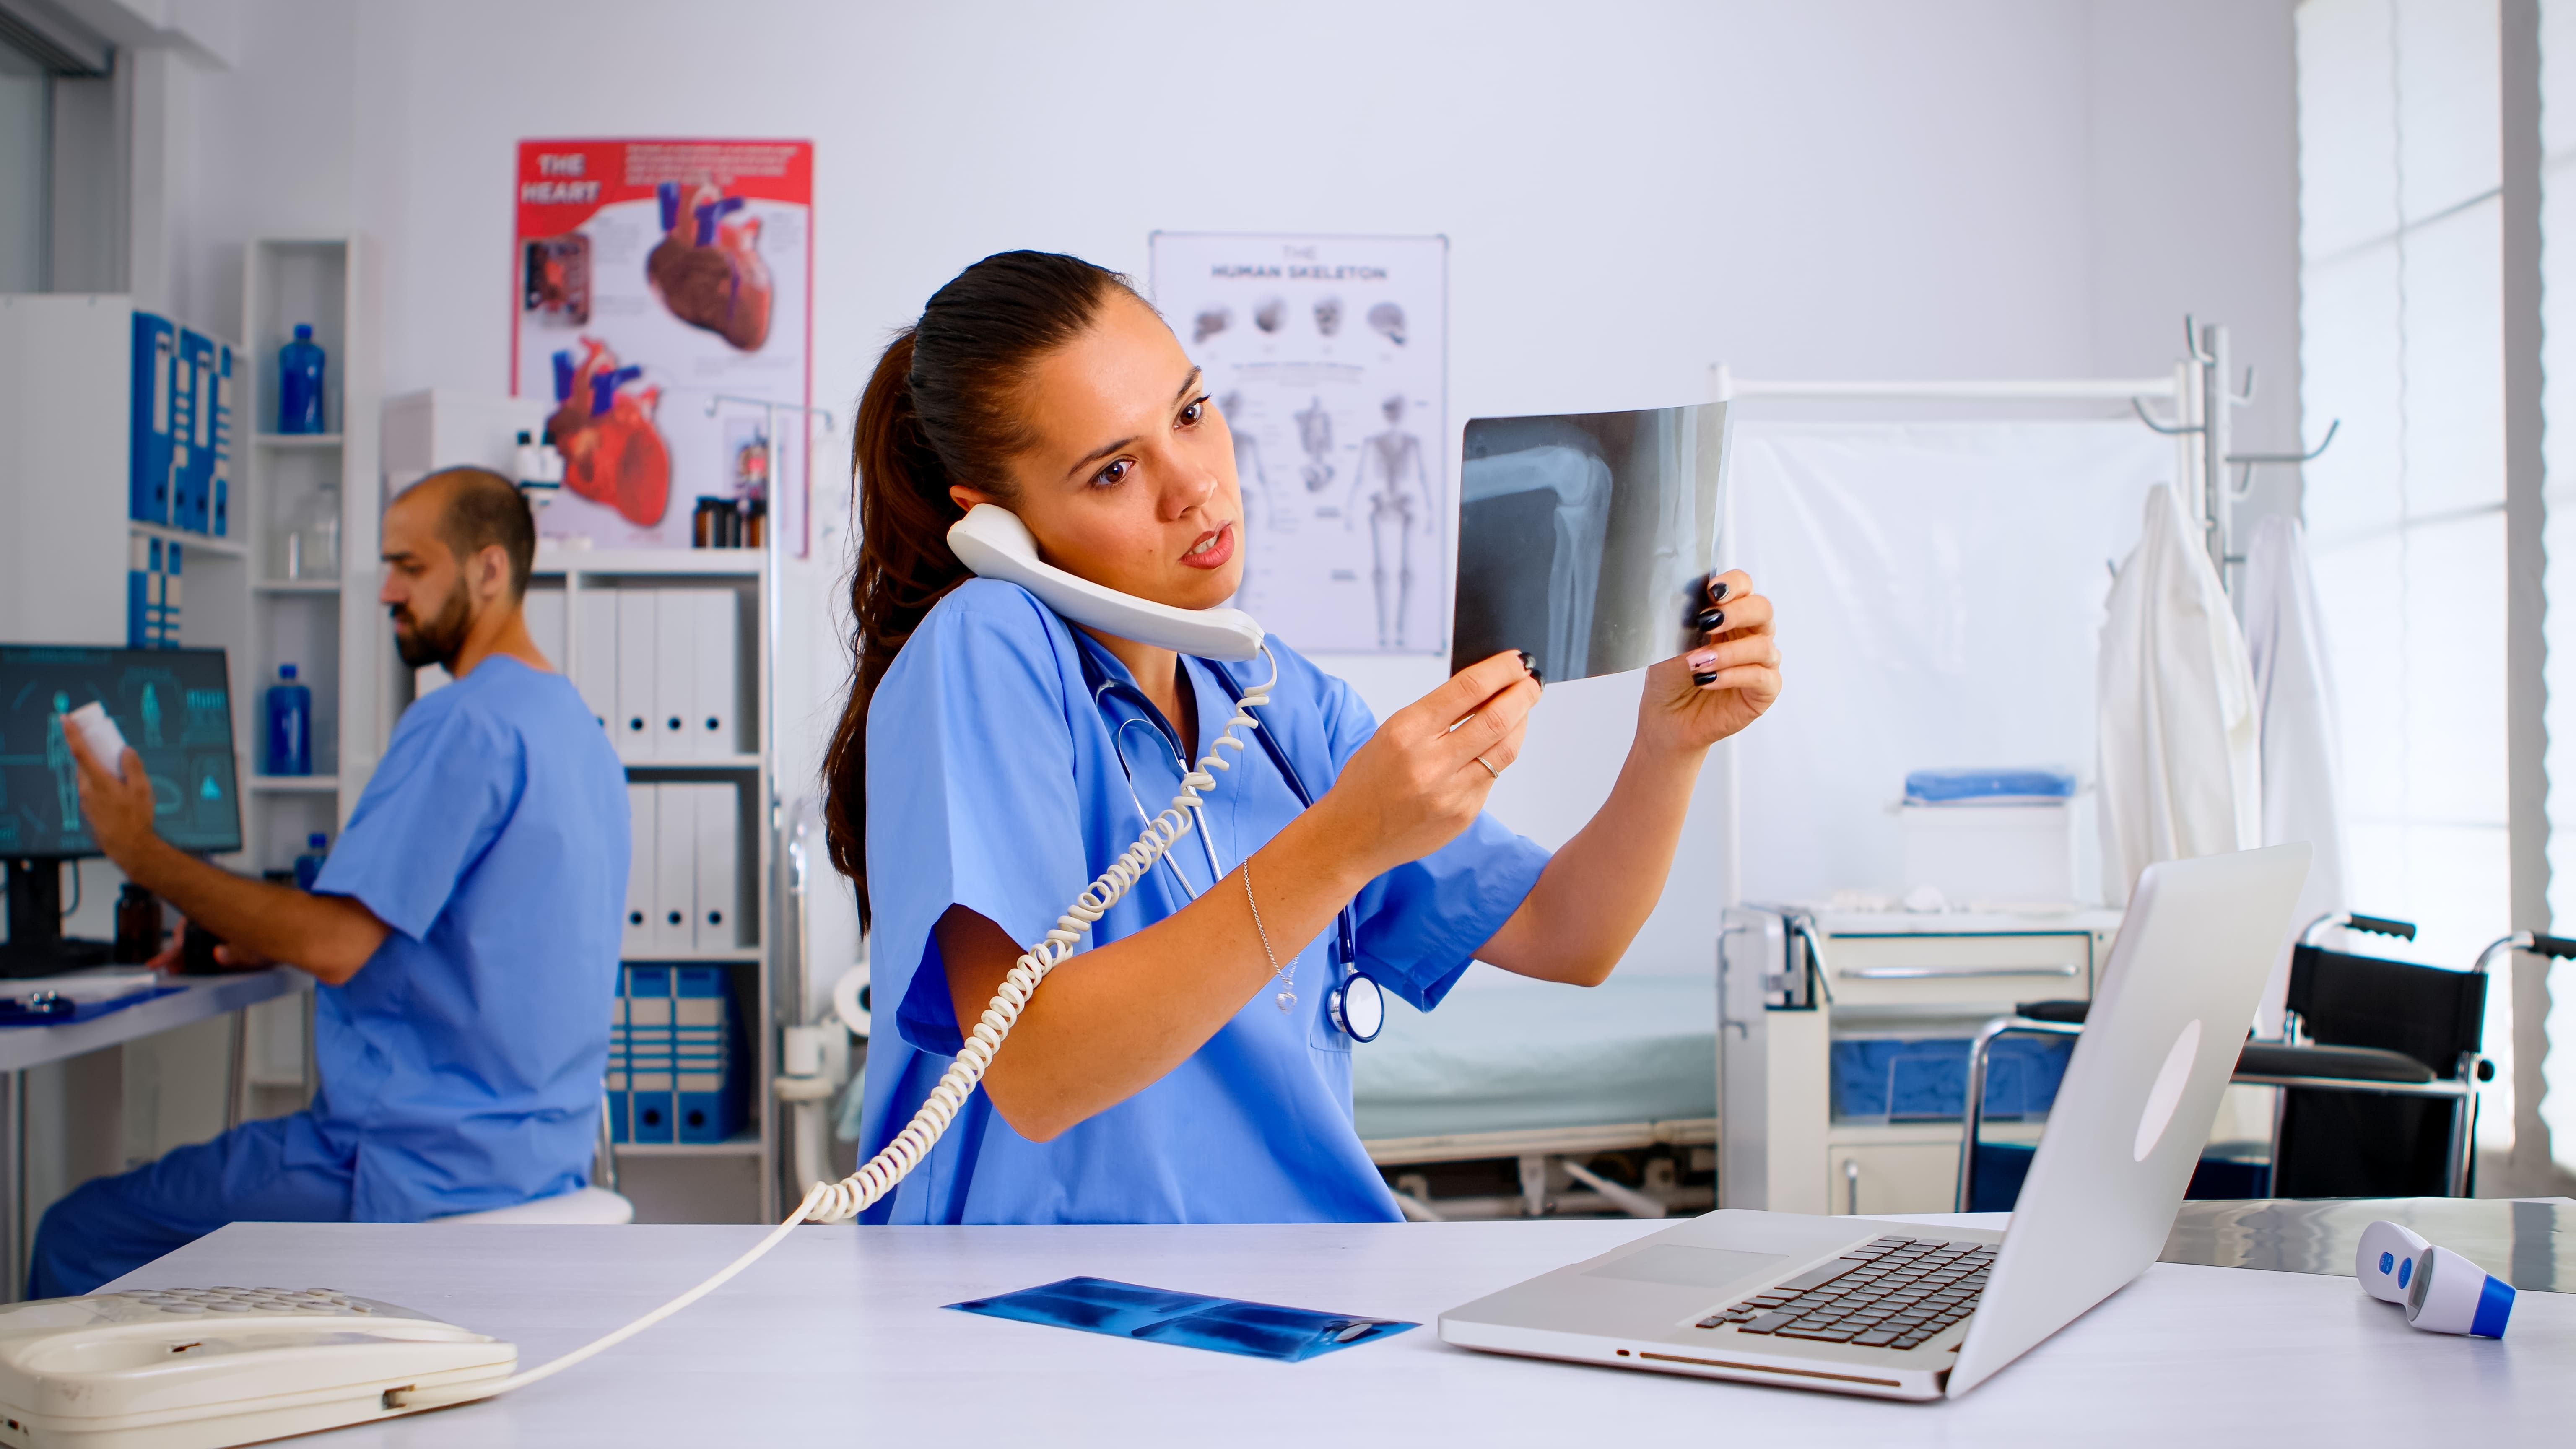 How Do You Maintain Your Knowledge and Skills in the Nursing Field?